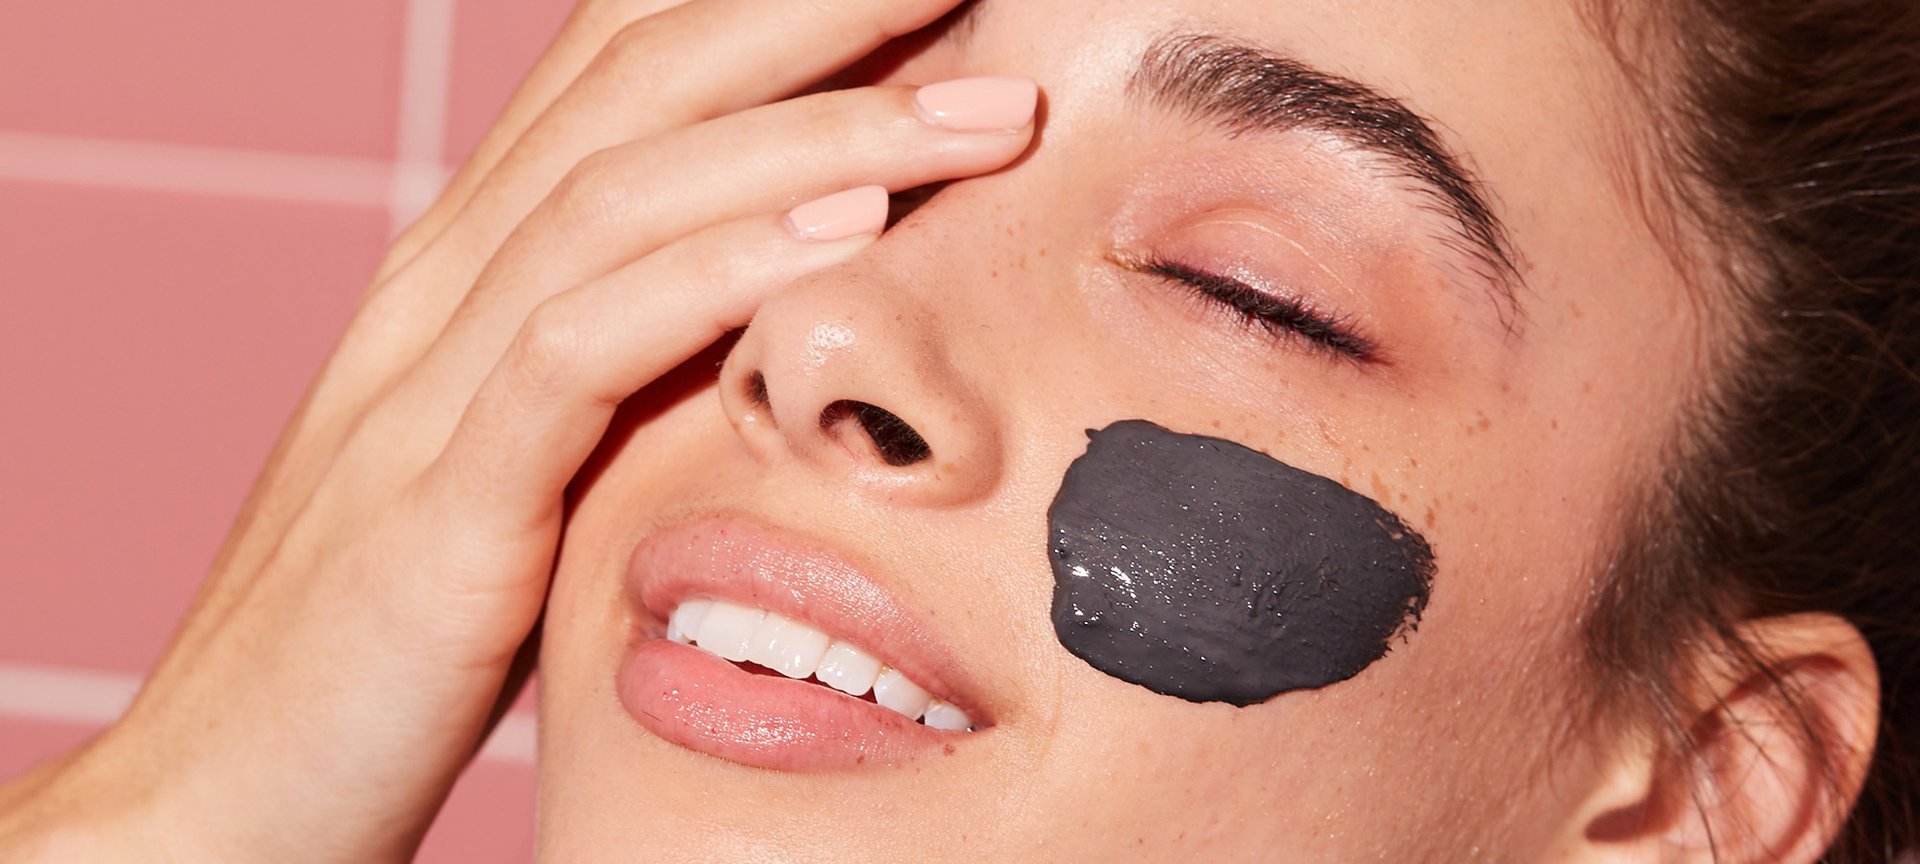 How to Apply Face Masks Properly: 8 Tips To Smooth Skin